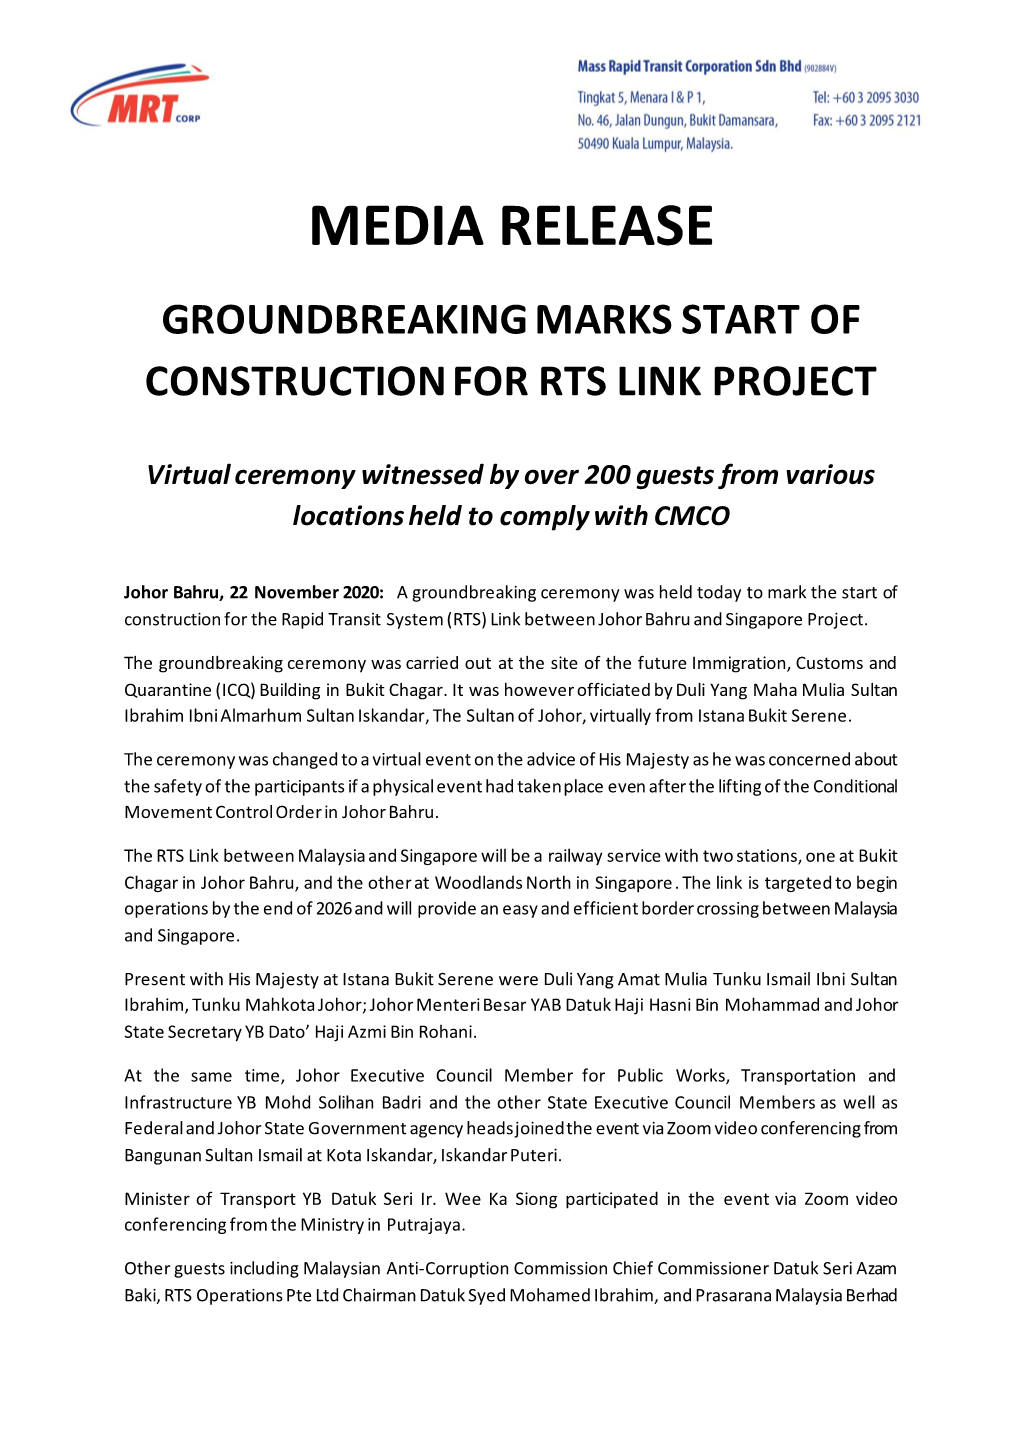 Media Release Groundbreaking Marks Start of Construction for Rts Link Project